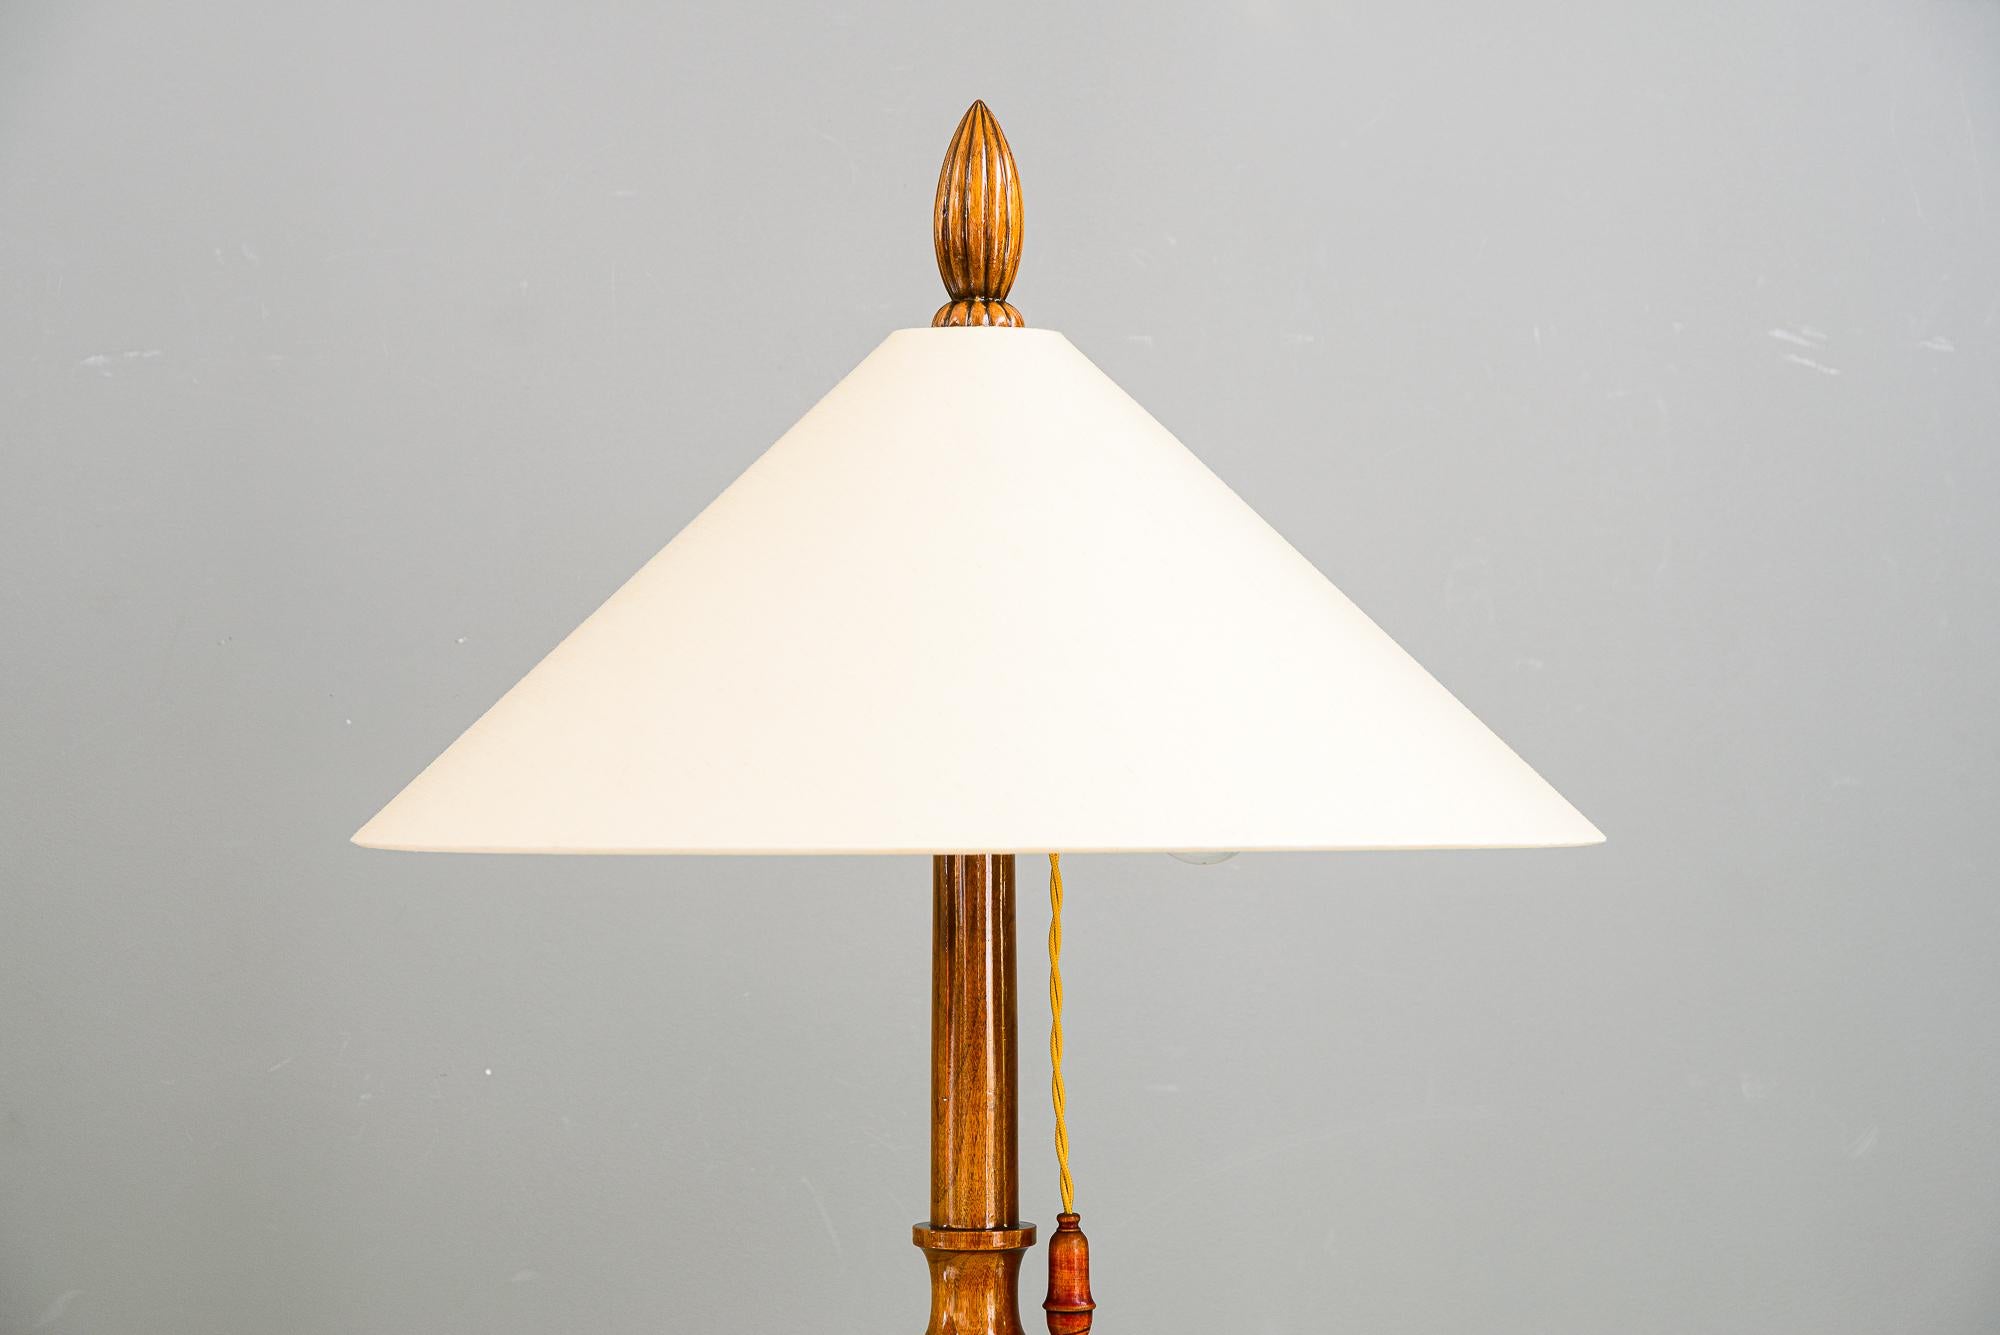 Floor lamp nut wood with fabric shade vienna around 1950s
Polished nut wood
The fabric shade is replaced ( new )